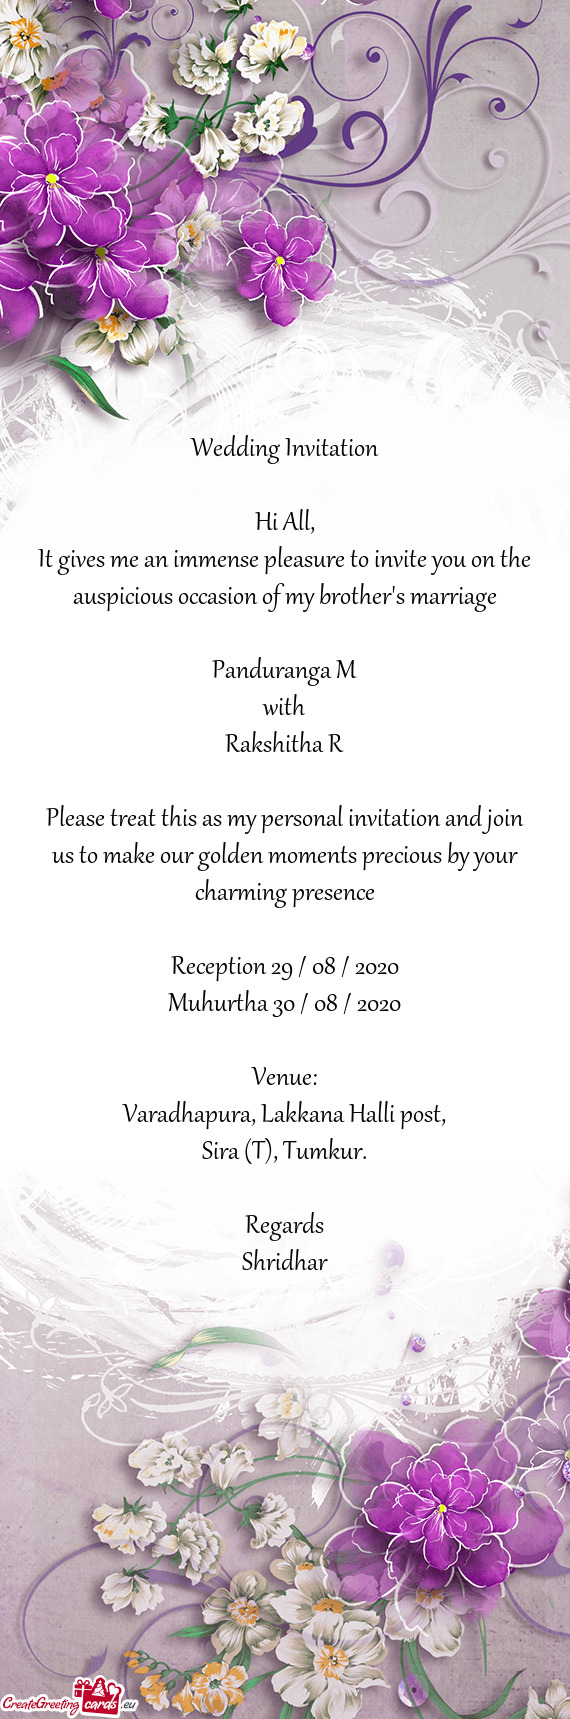 It gives me an immense pleasure to invite you on the auspicious occasion of my brother